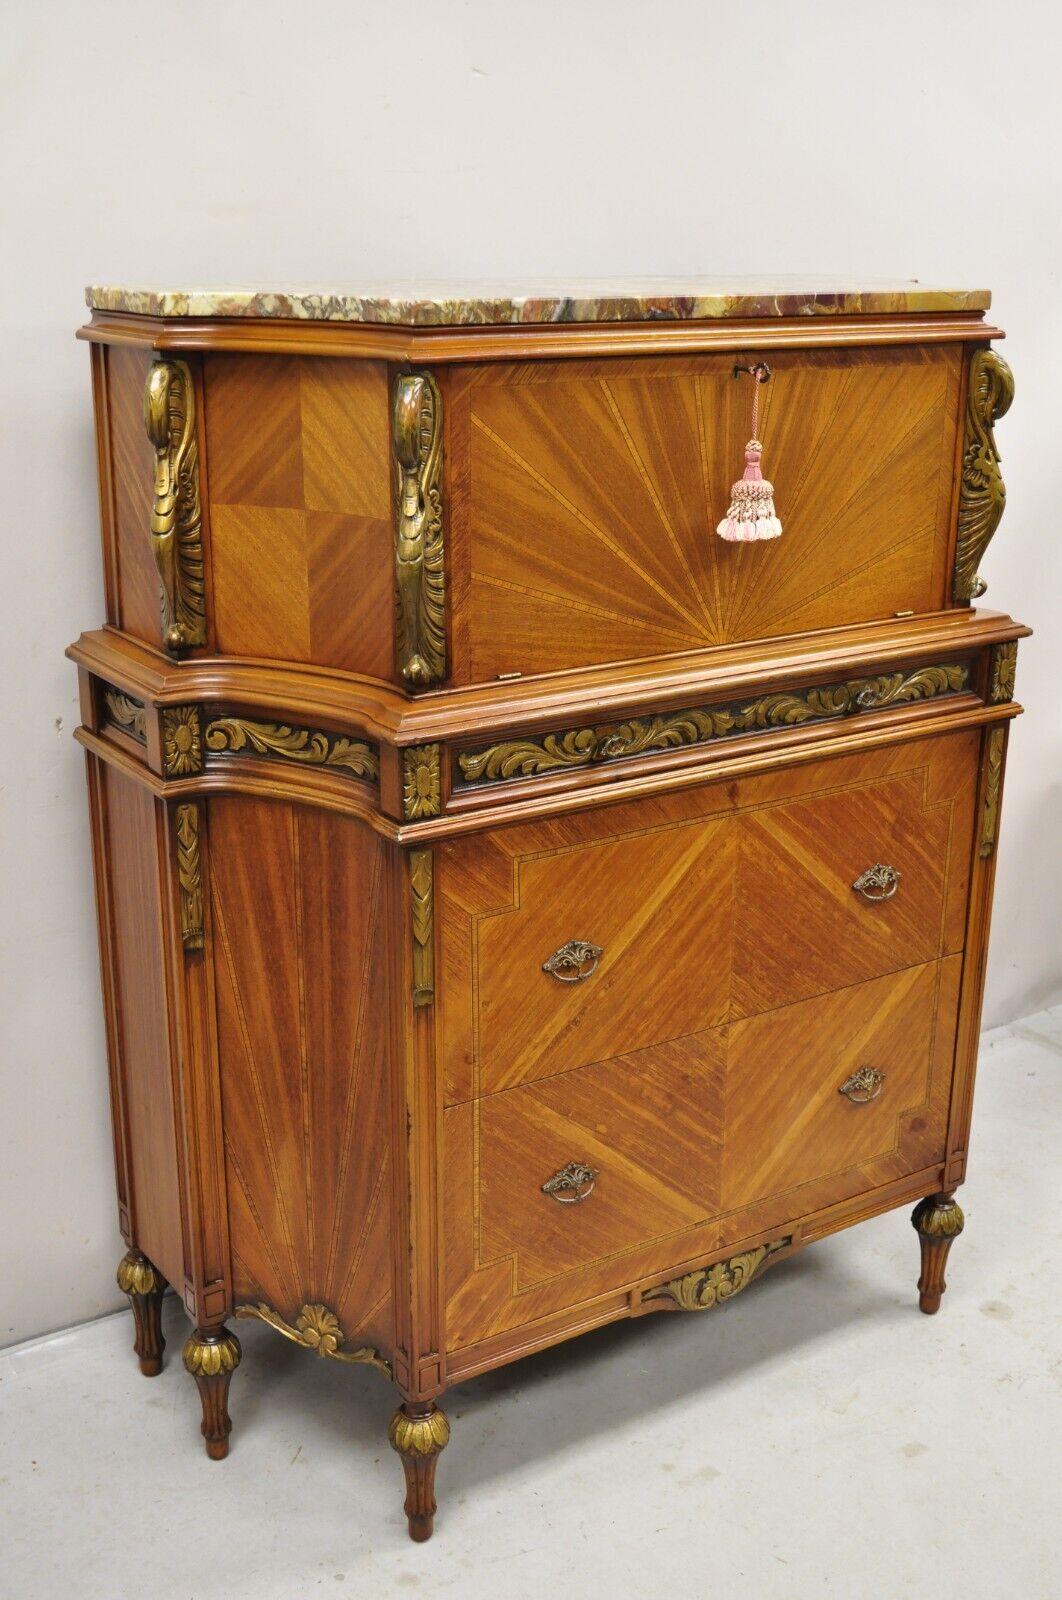 Antique French Louis XVI Style Marble Top Satinwood Tall Chest Dresser with Swans. Item features a shaped rouge marble top, carved swan accents, 6 legs, curved sides, satinwood mahogany case with sunburst inlay, 4 dovetailed drawers, working lock